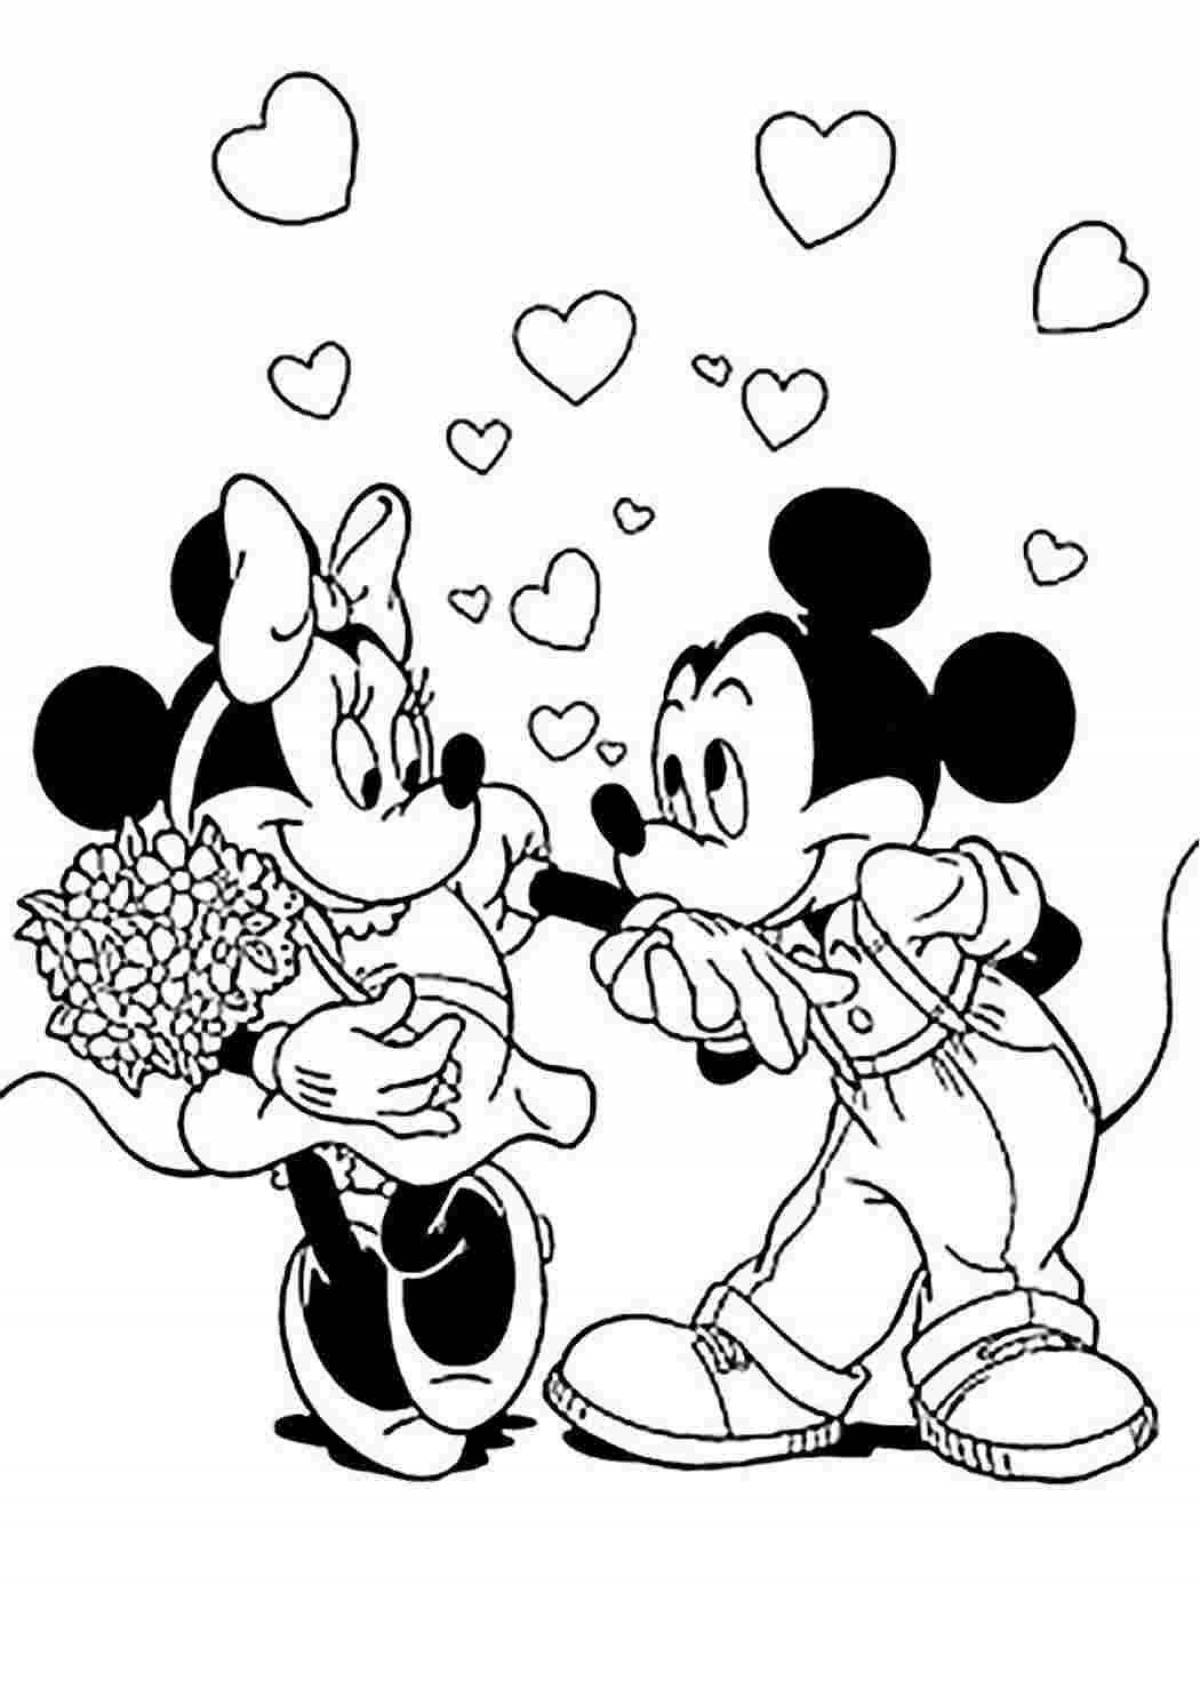 Colouring Minnie mouse in ecstasy